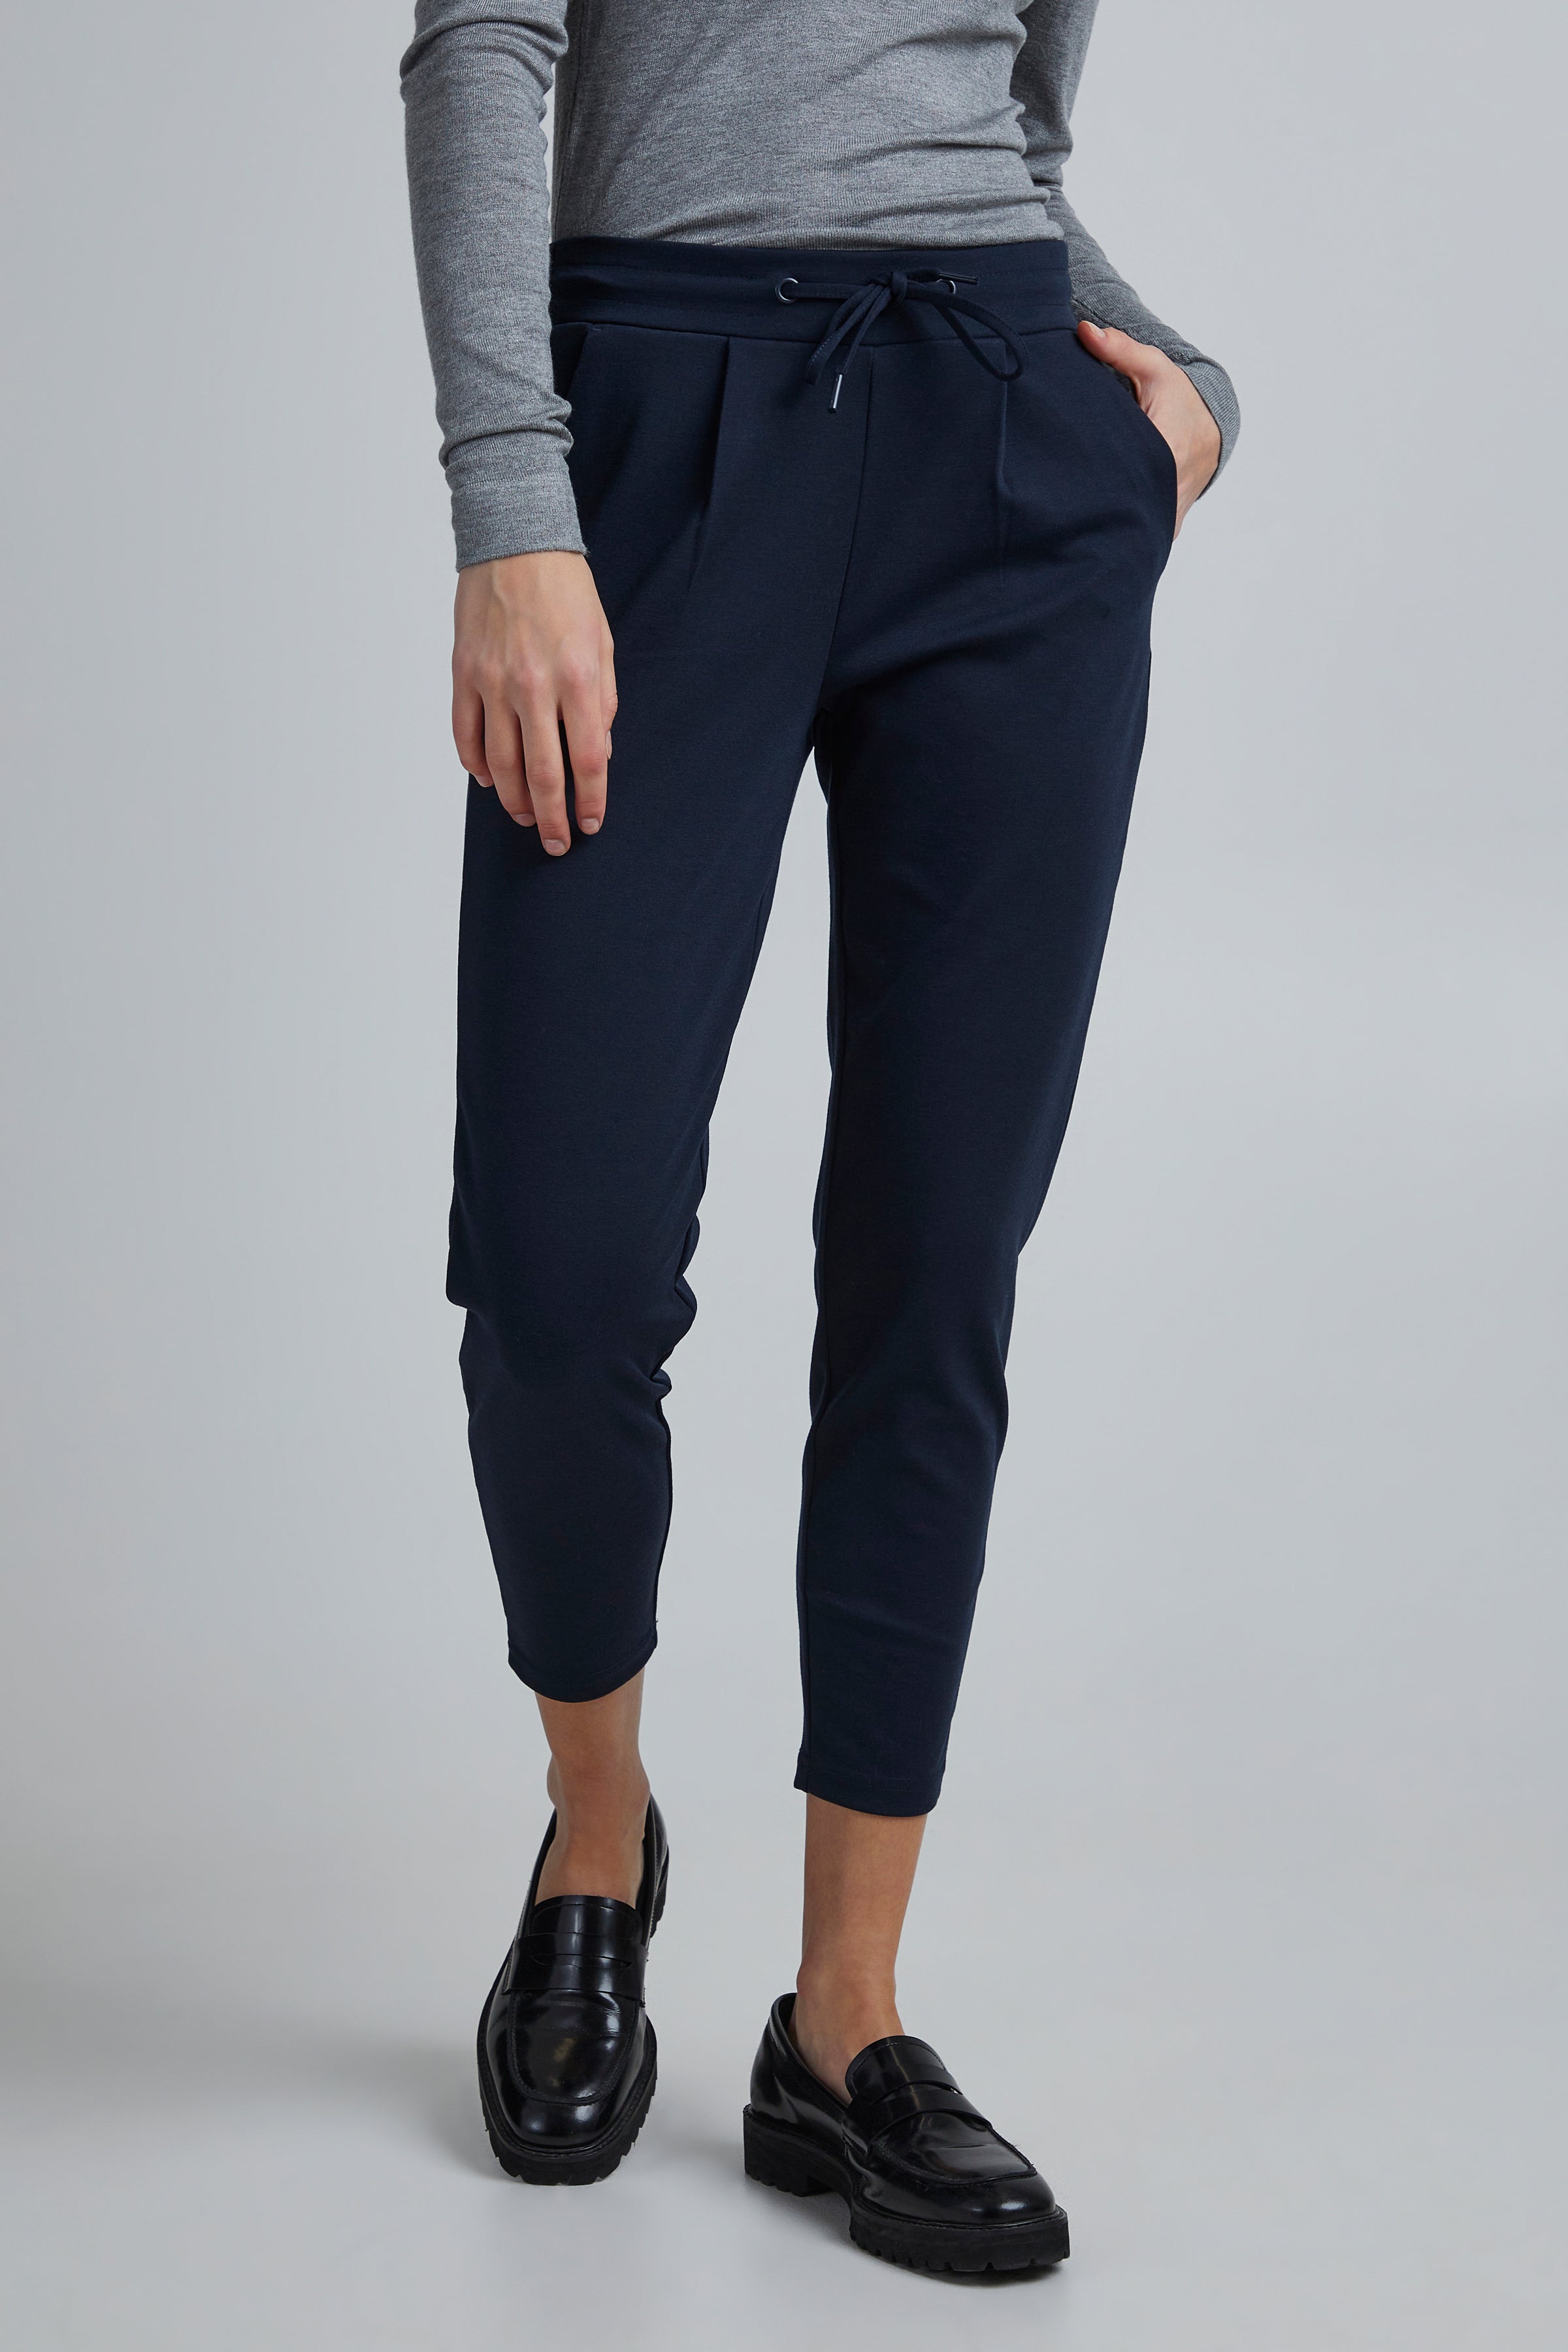 KATE CROPPED JERSEY JOGGER (NAVY)